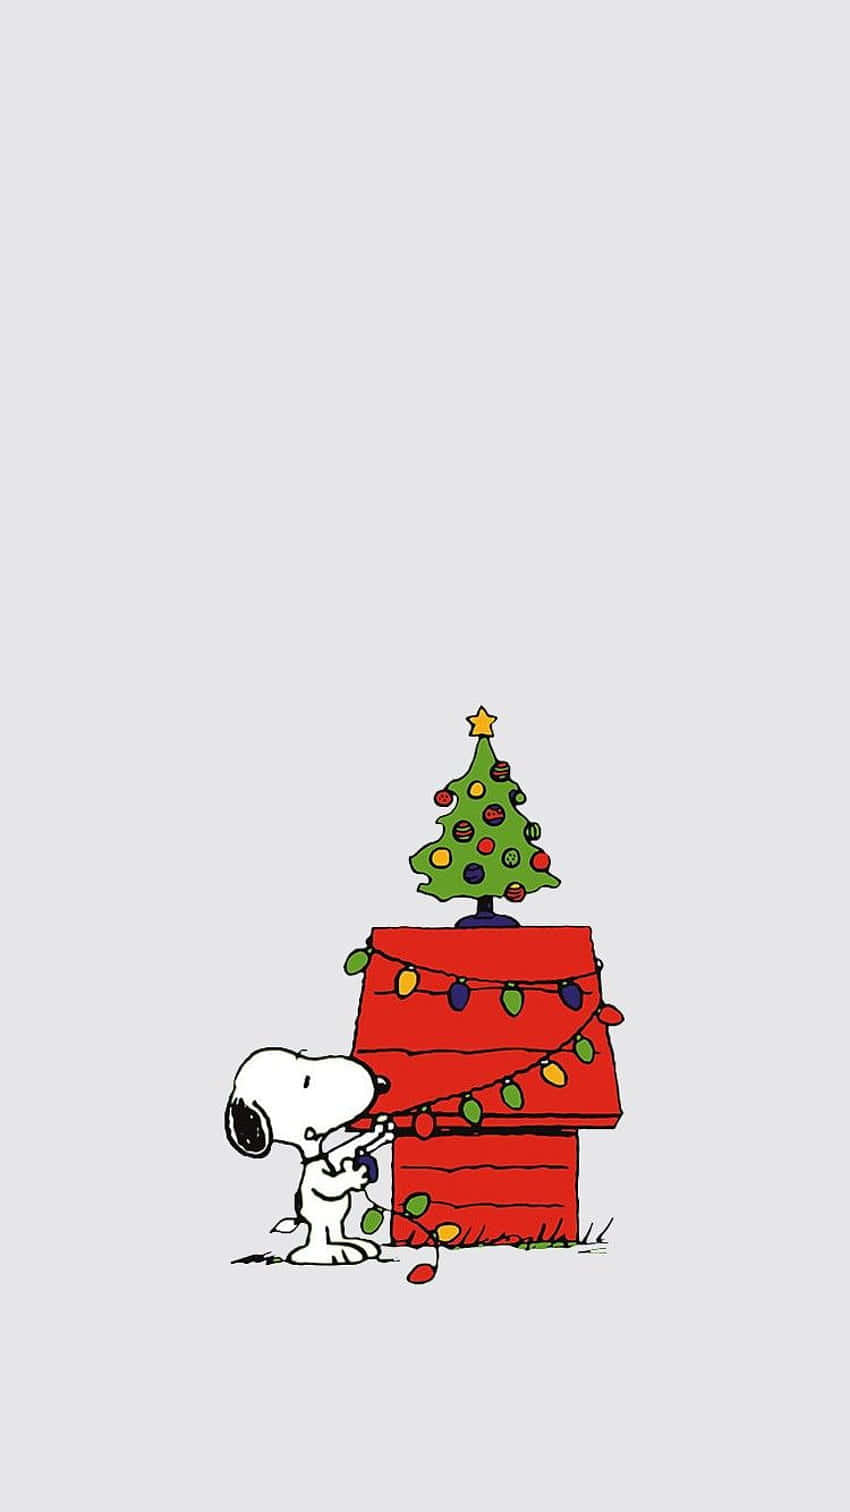 Snoopy And His Dog Are Standing Next To A Christmas Tree Wallpaper